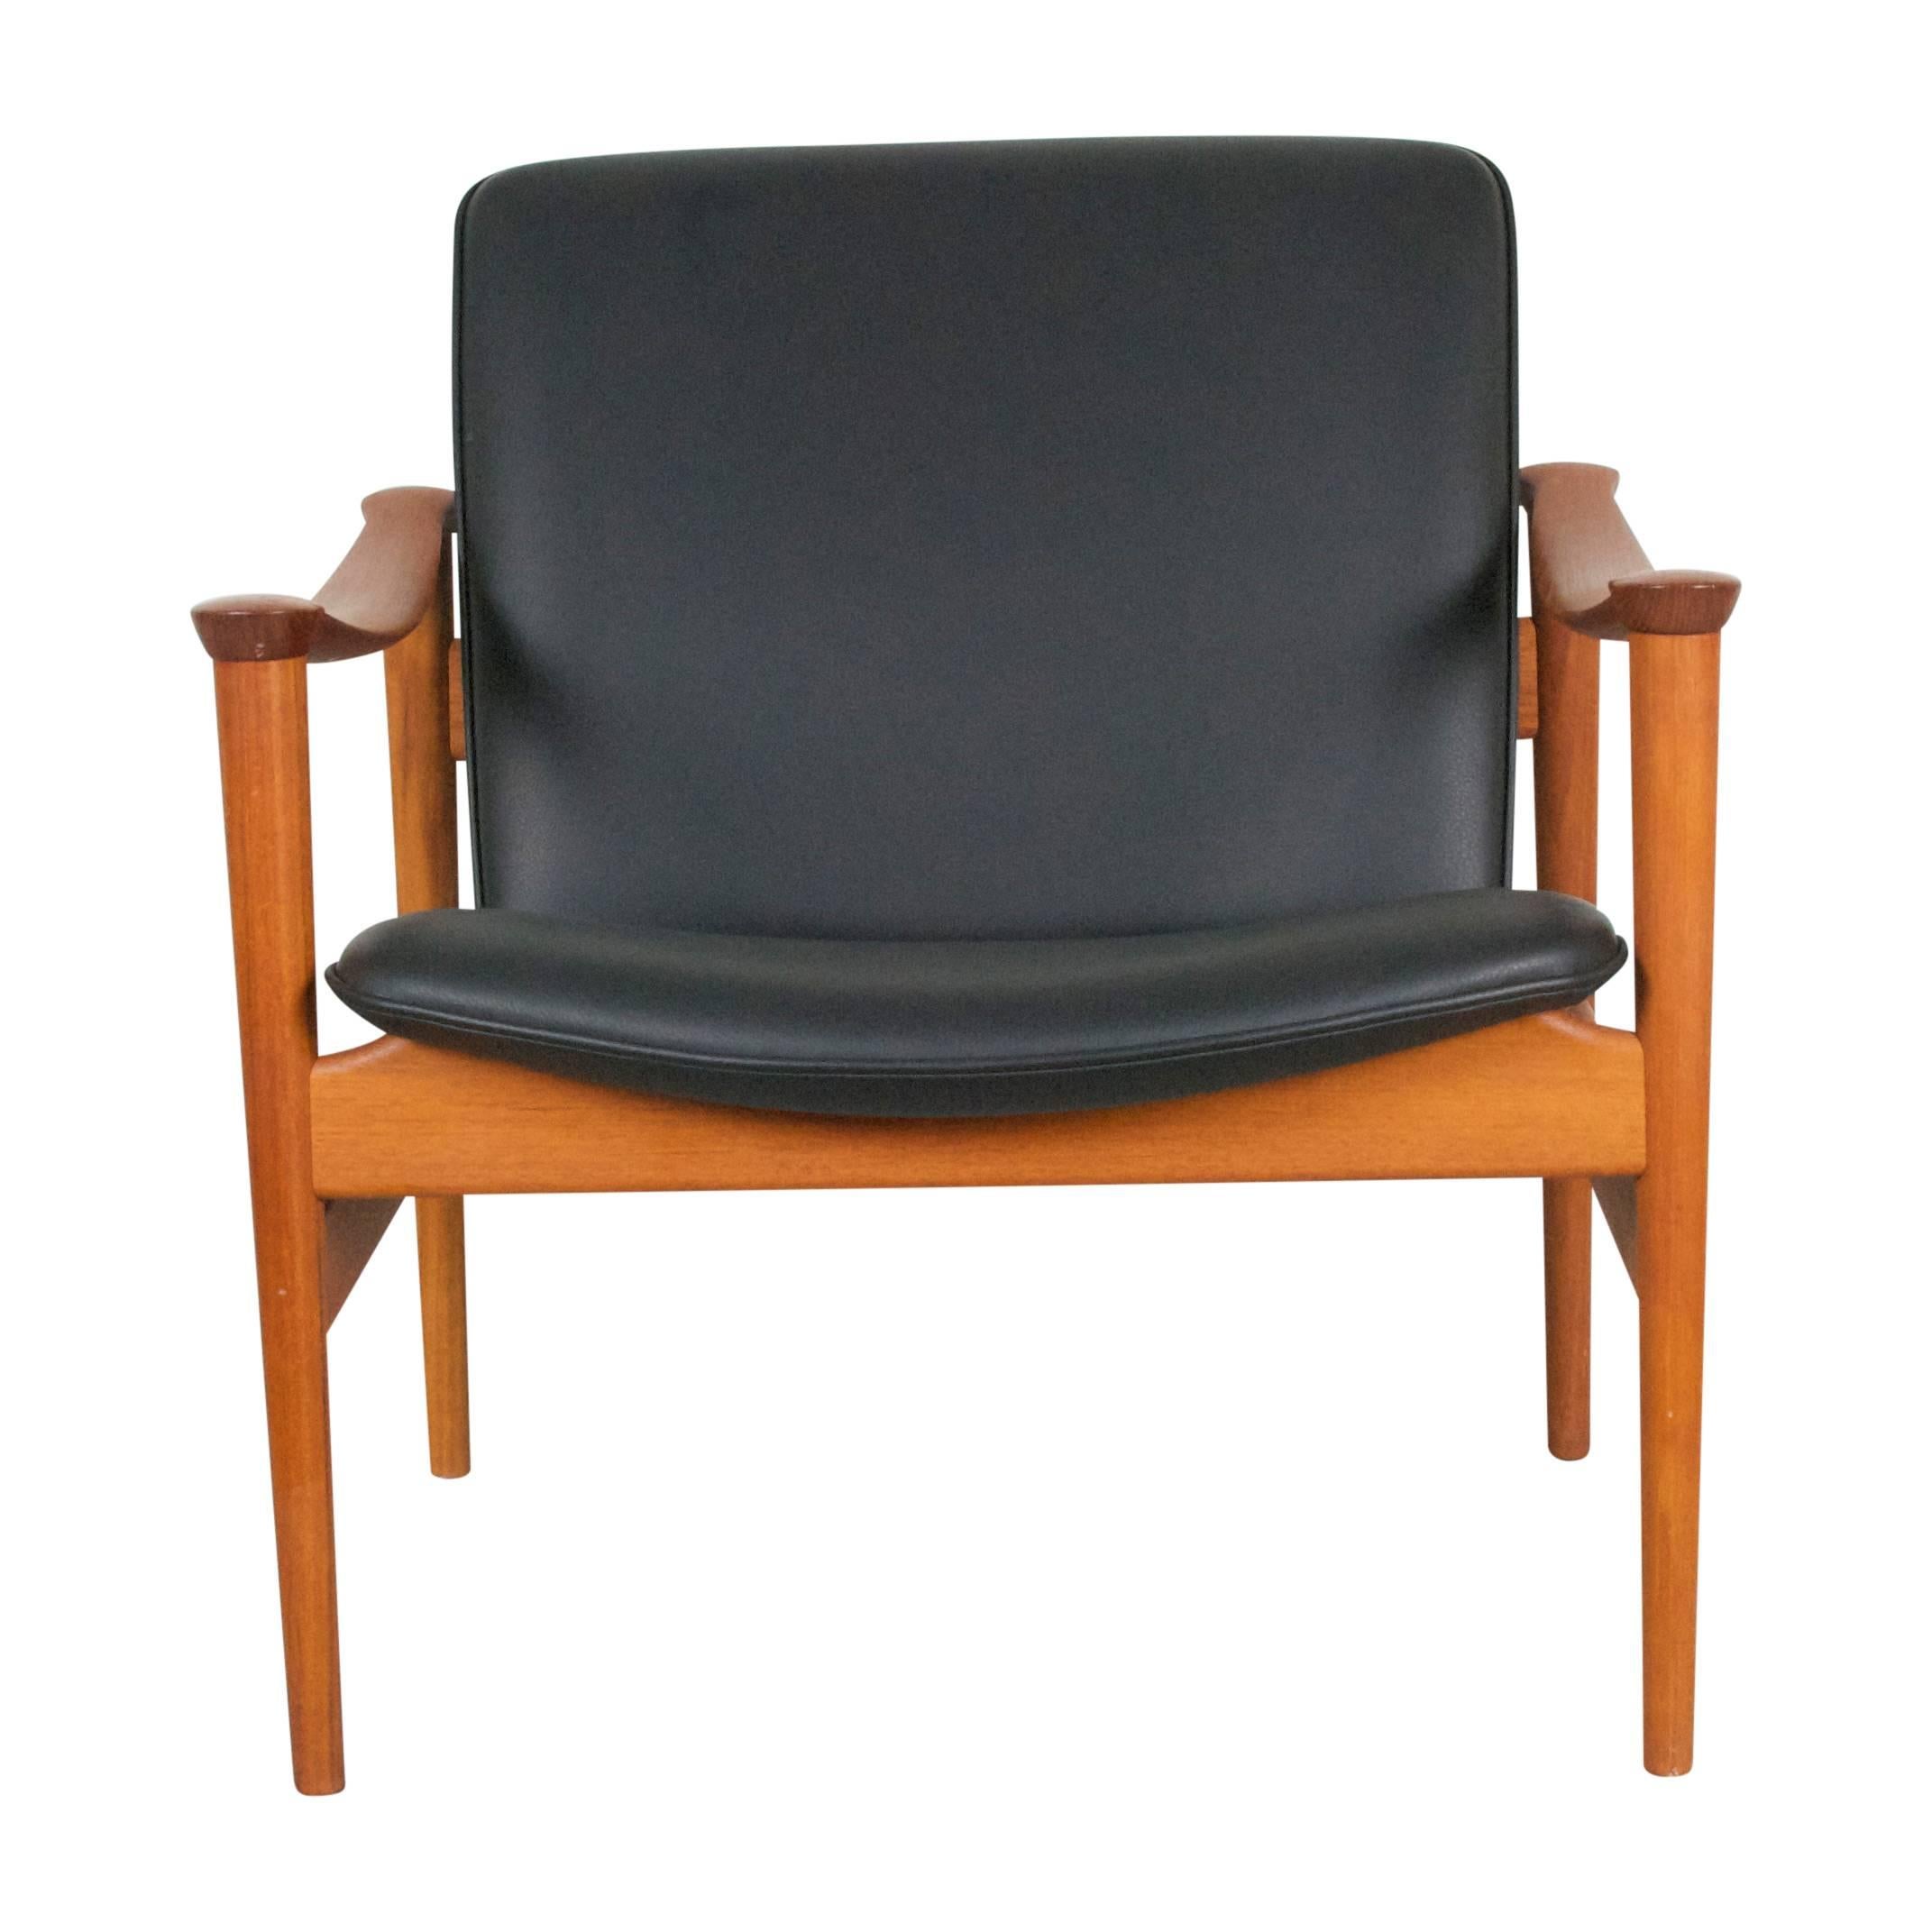 Rare Fredrik A.Kayser Armchair model 711. This Model was manufactured probably in the late 70s still in teak. Its unused and in perfect condition reupholstered at the Manufacturer in Norway. 